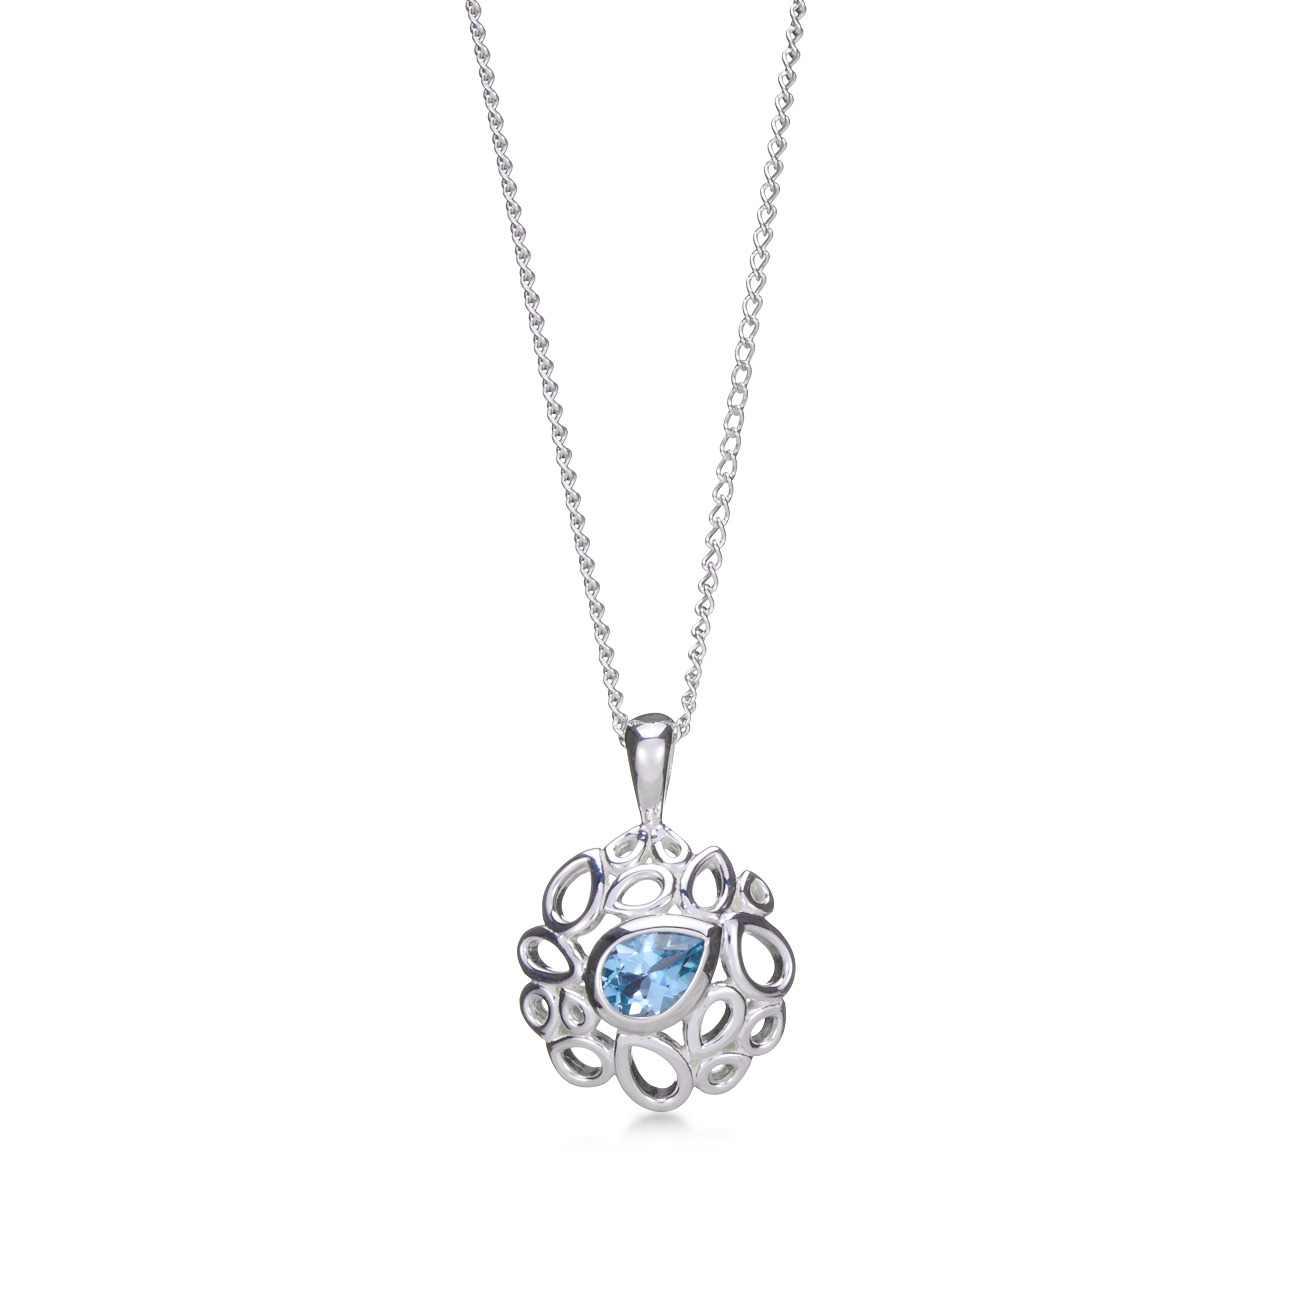 Pear-Shaped Blue Topaz Pendant - Coppins Jewellery